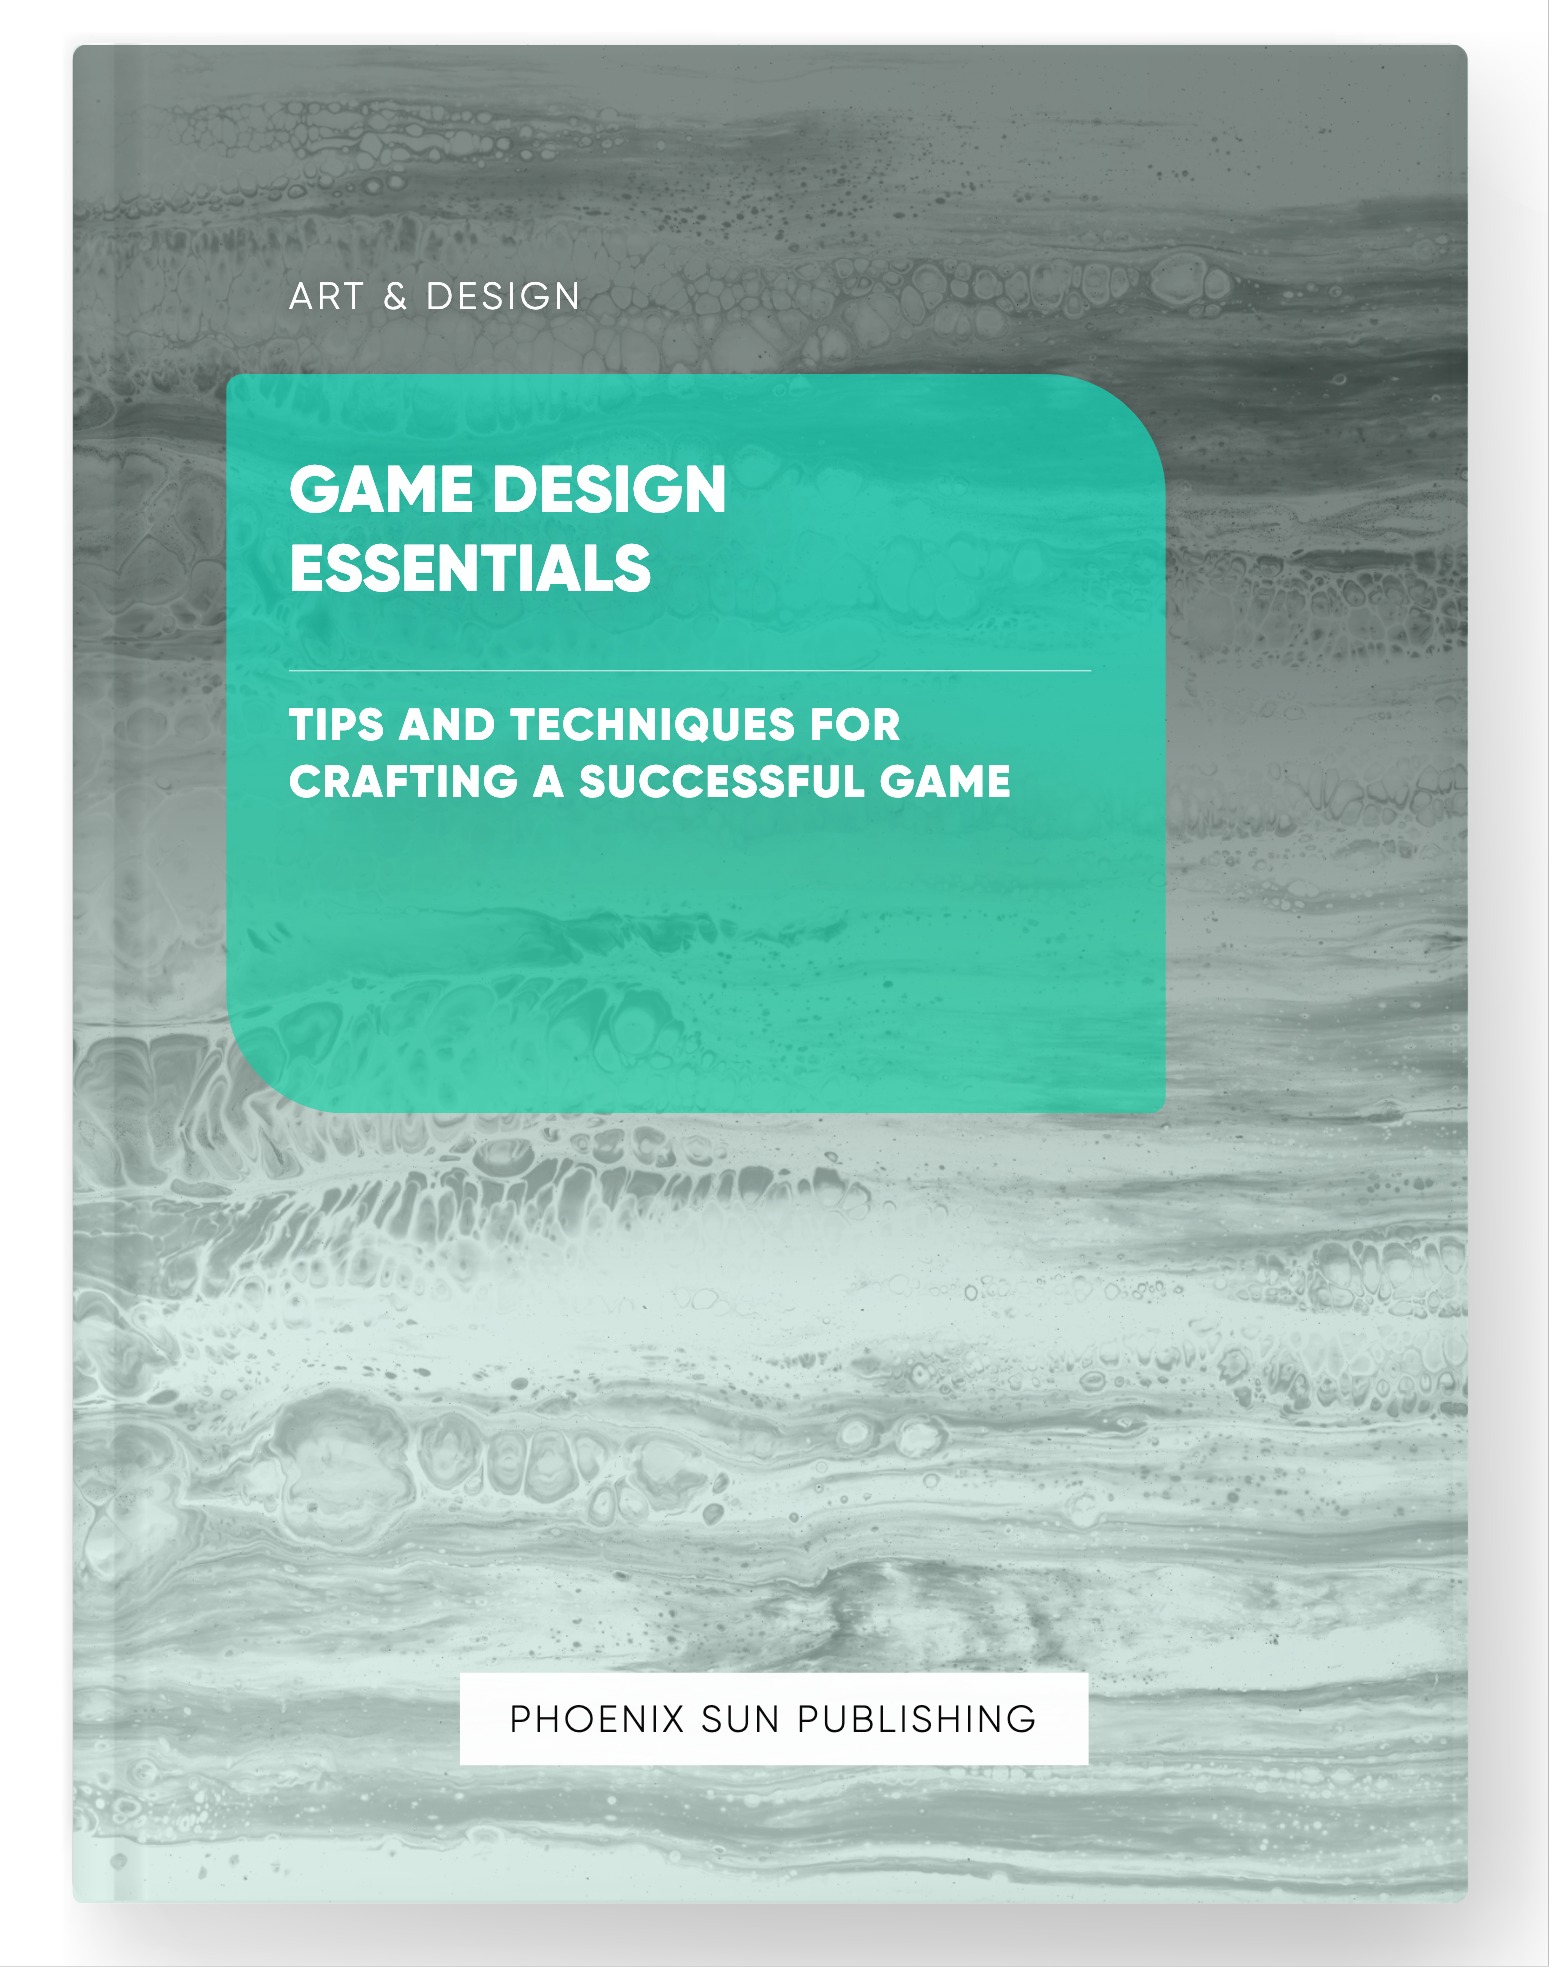 Game Design Essentials – Tips and Techniques for Crafting a Successful Game